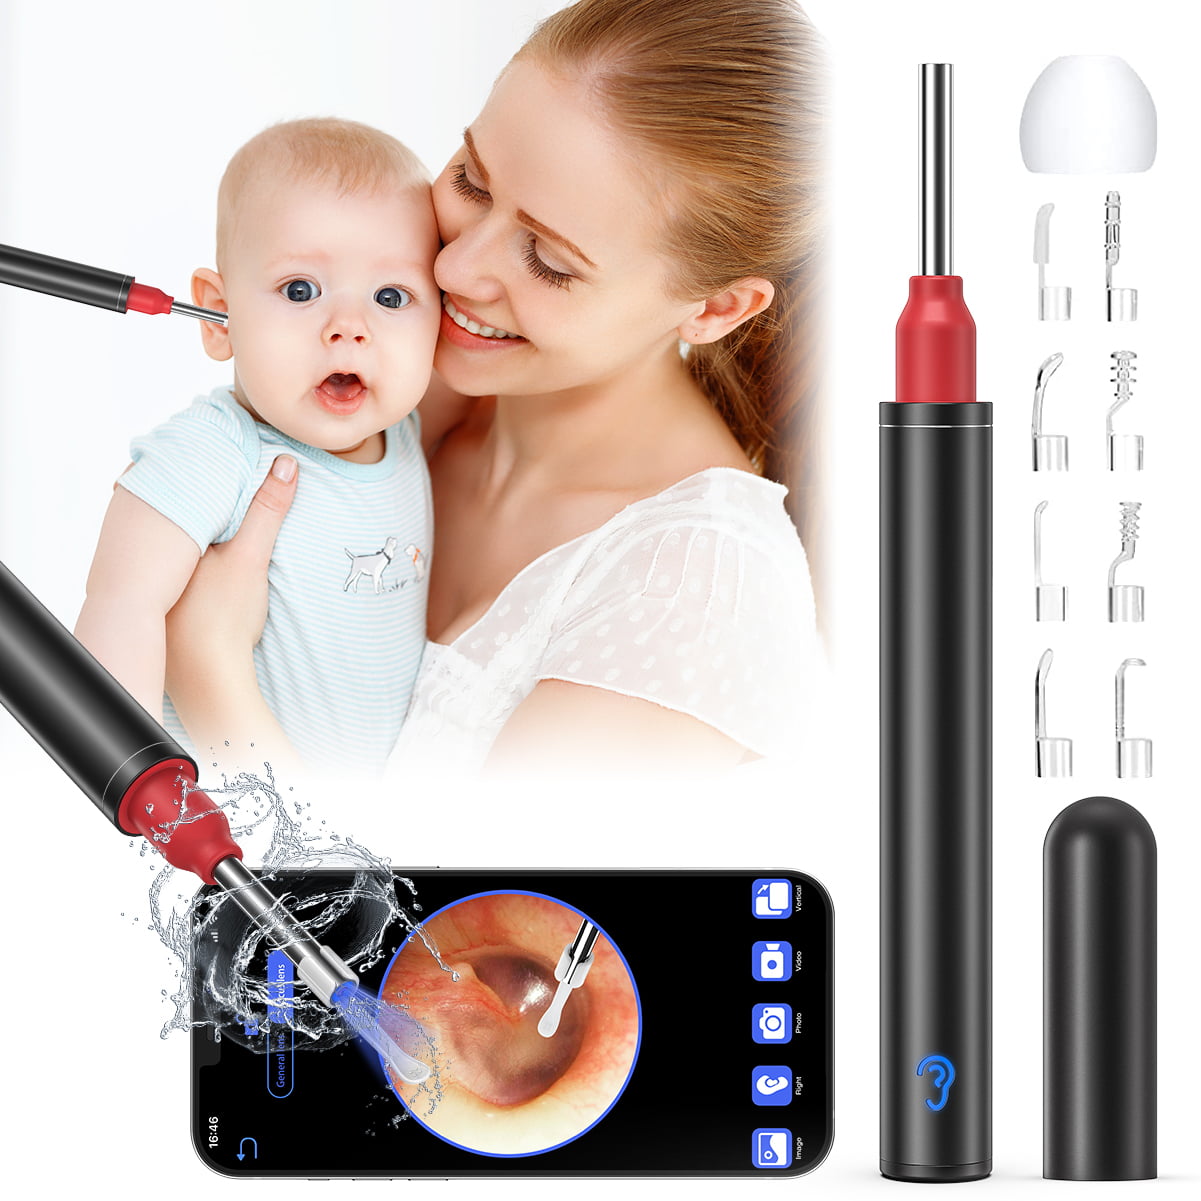 1080P HD Wireless Ear Otoscope with 6 LED Lights Ear Wax Removal Tool for Children & Adults Ear Wax Removal Endoscope WiFi Ear Scope 2020 Upgraded Ear Camera 